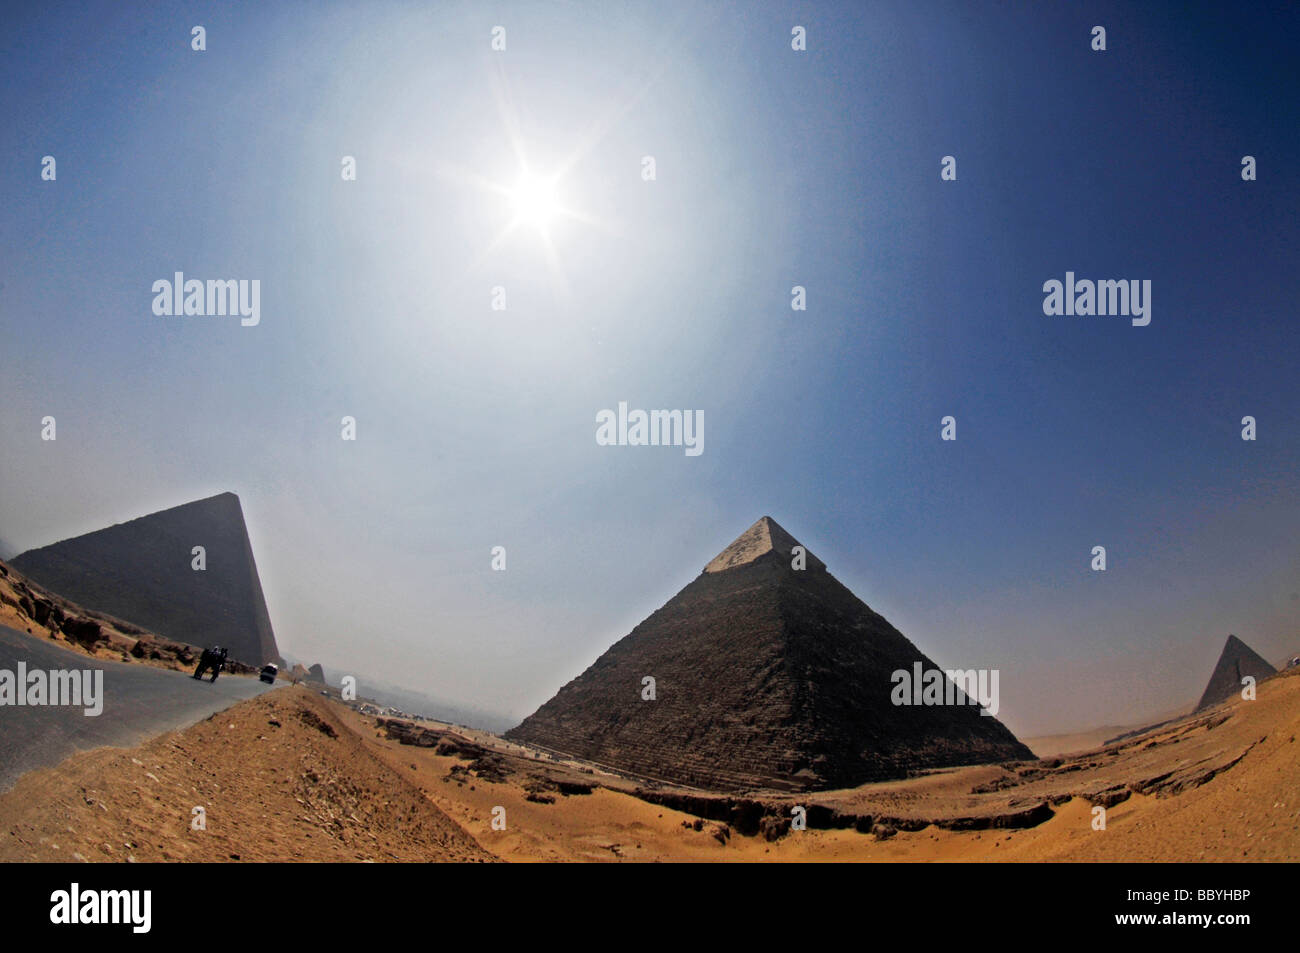 Pyramids in Gizeh, Egypt. Stock Photo